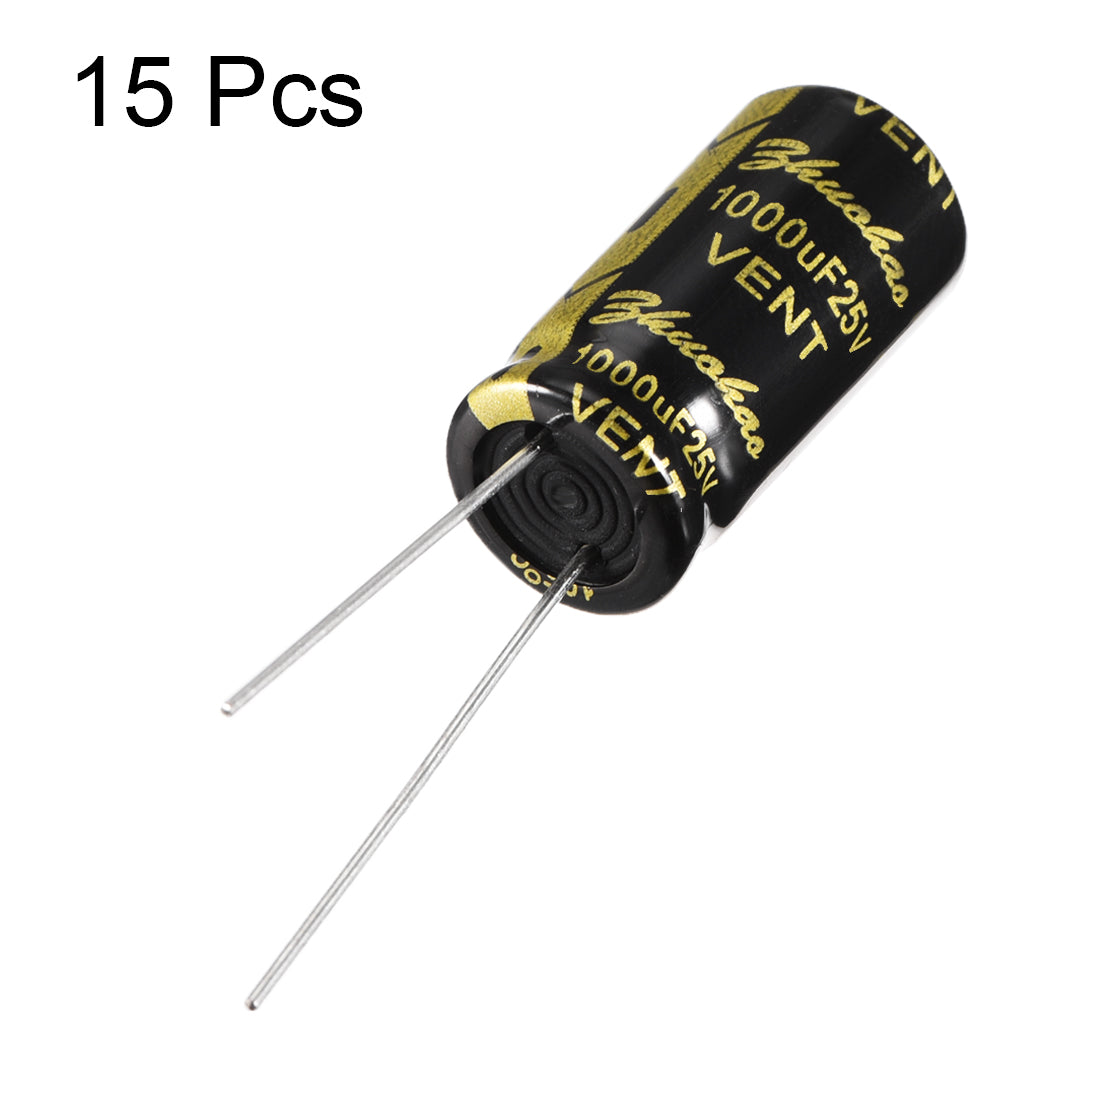 uxcell Uxcell Aluminum Radial Electrolytic Capacitor with 1000uF 25V 105 Celsius Life 2000H 10 x 20 mm Black 15pcs